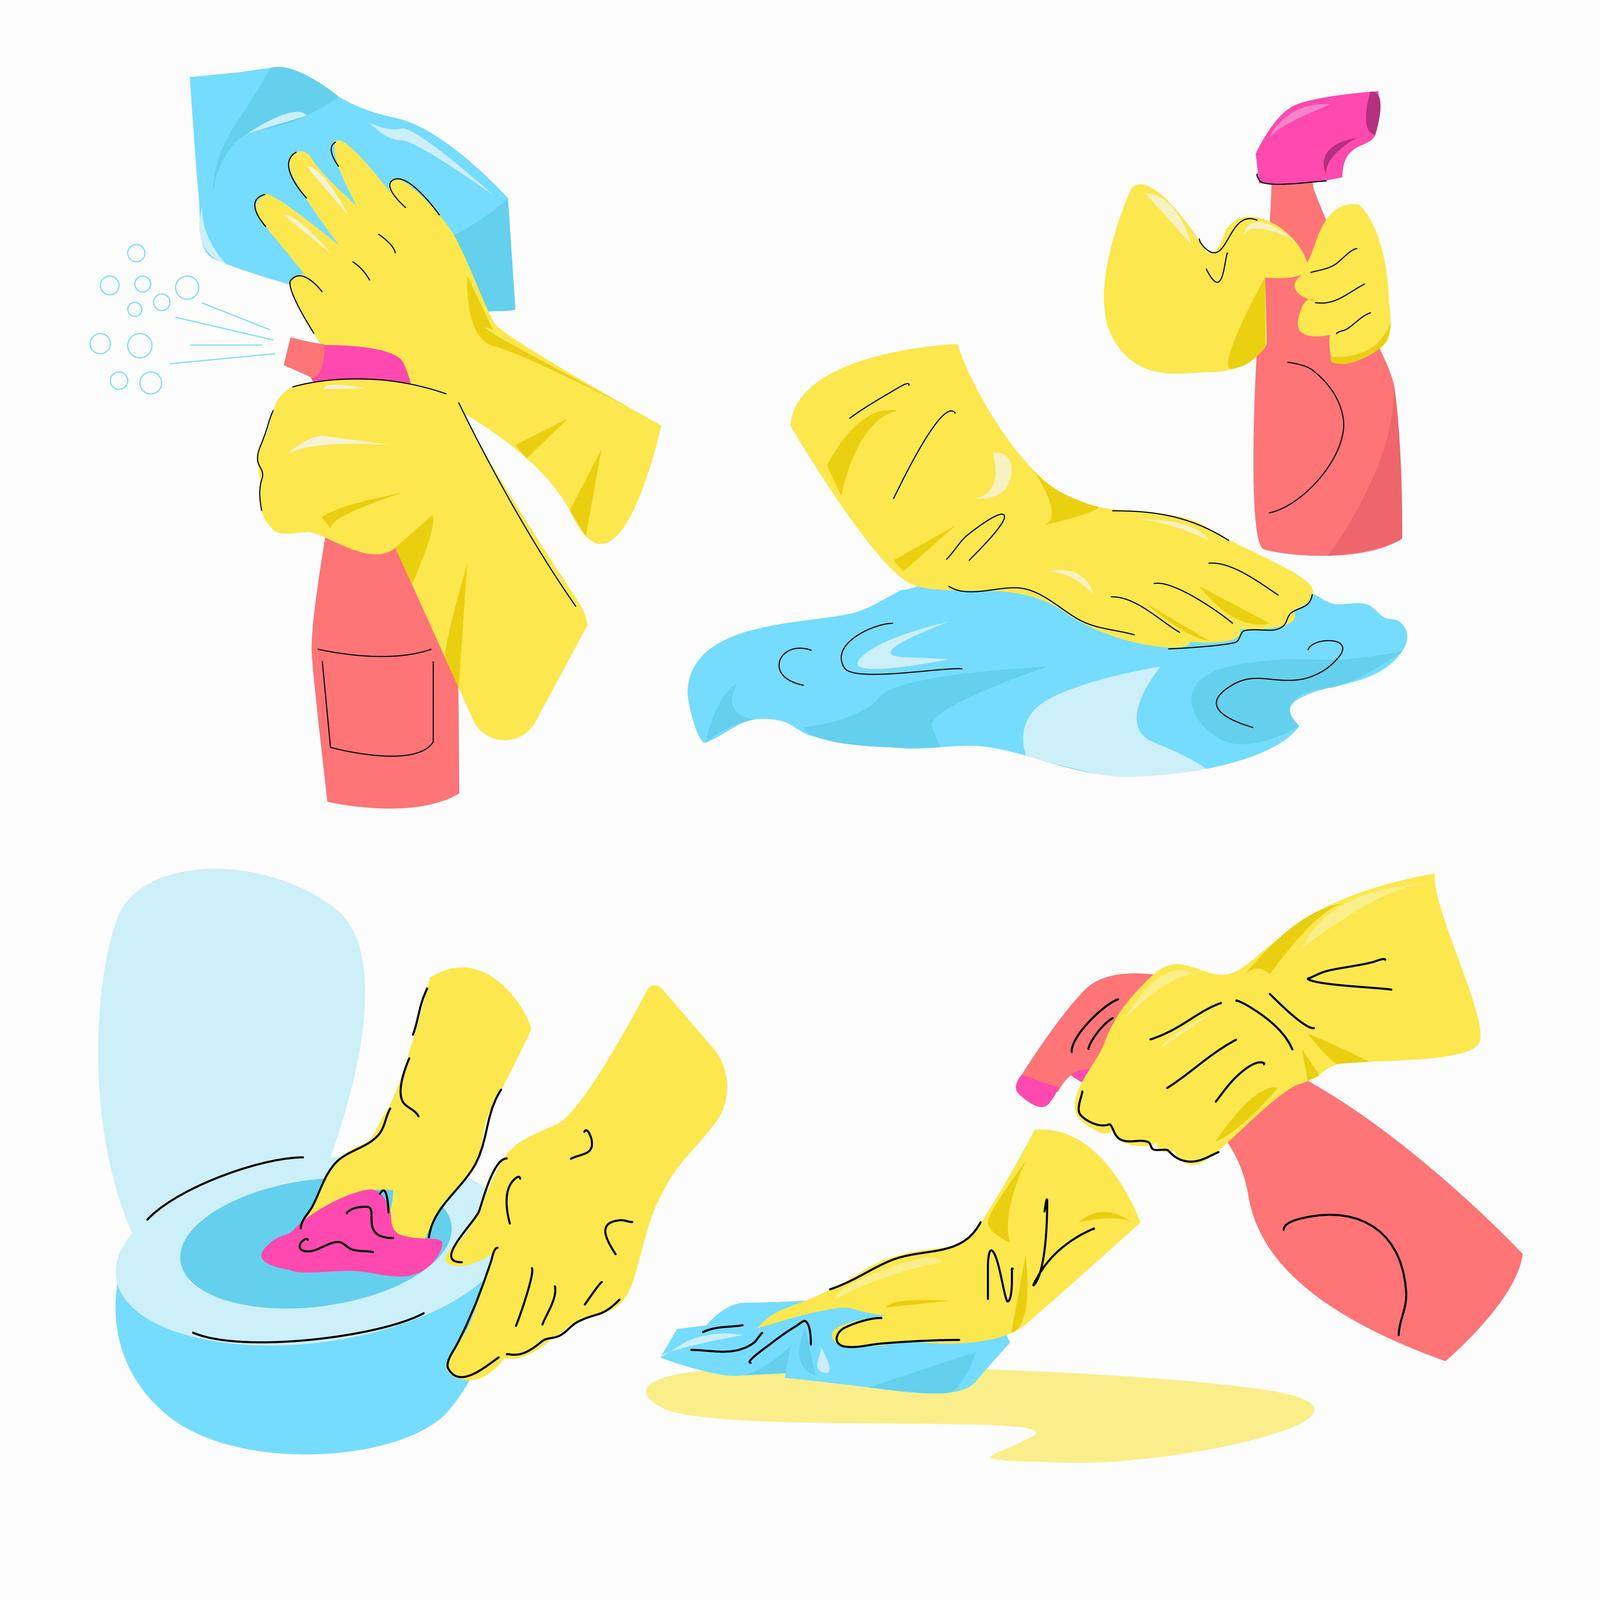 Yellow-gloved hands wash and clean various surfaces. by EvgeniyaEgorova